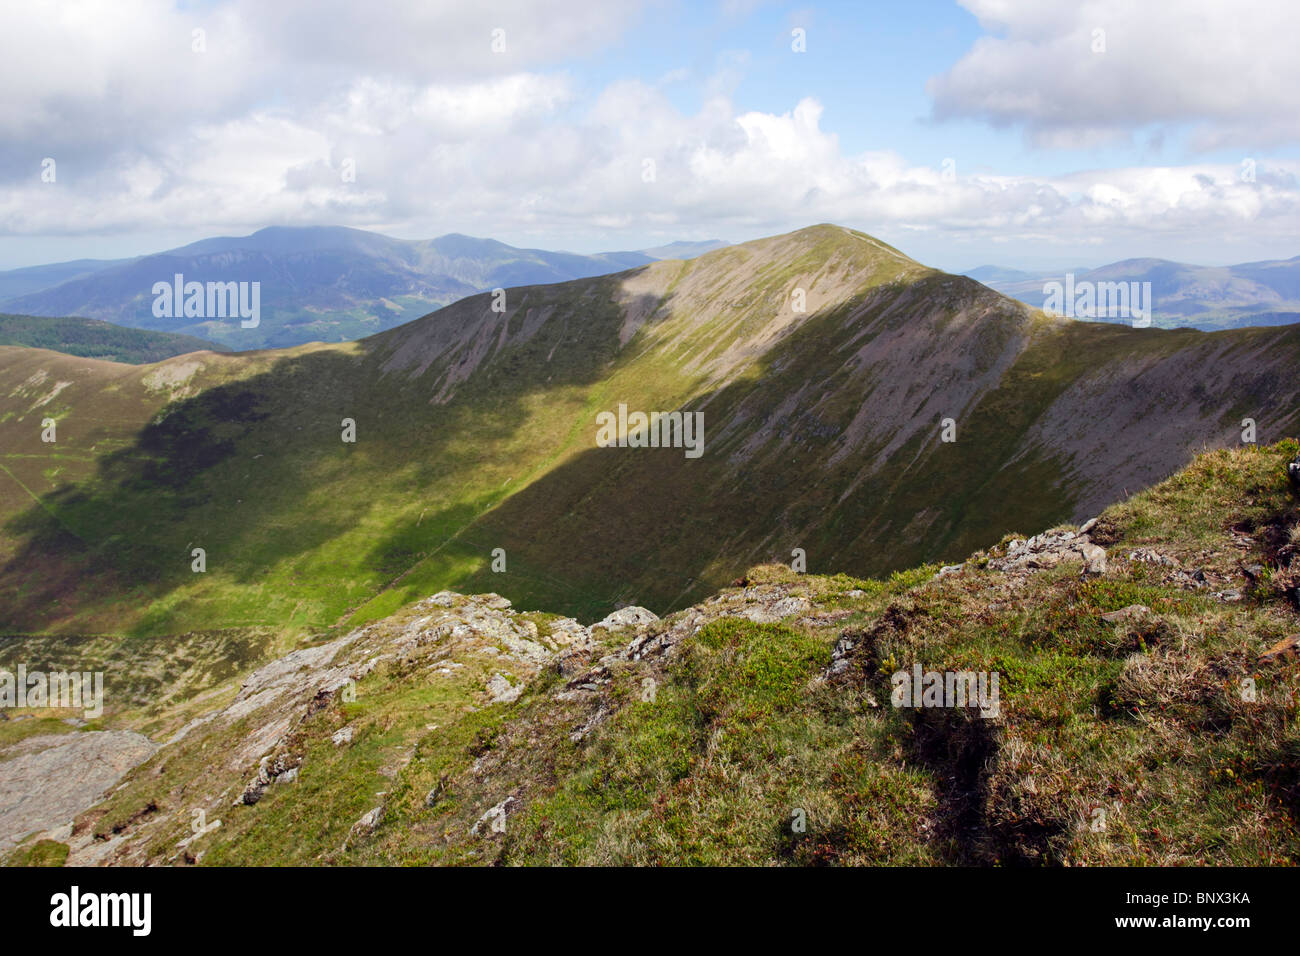 Looking towards Grisedale Pike from Hobcarton Crag on Hopegill Head in the Lake District National Park, Cumbria. Stock Photo